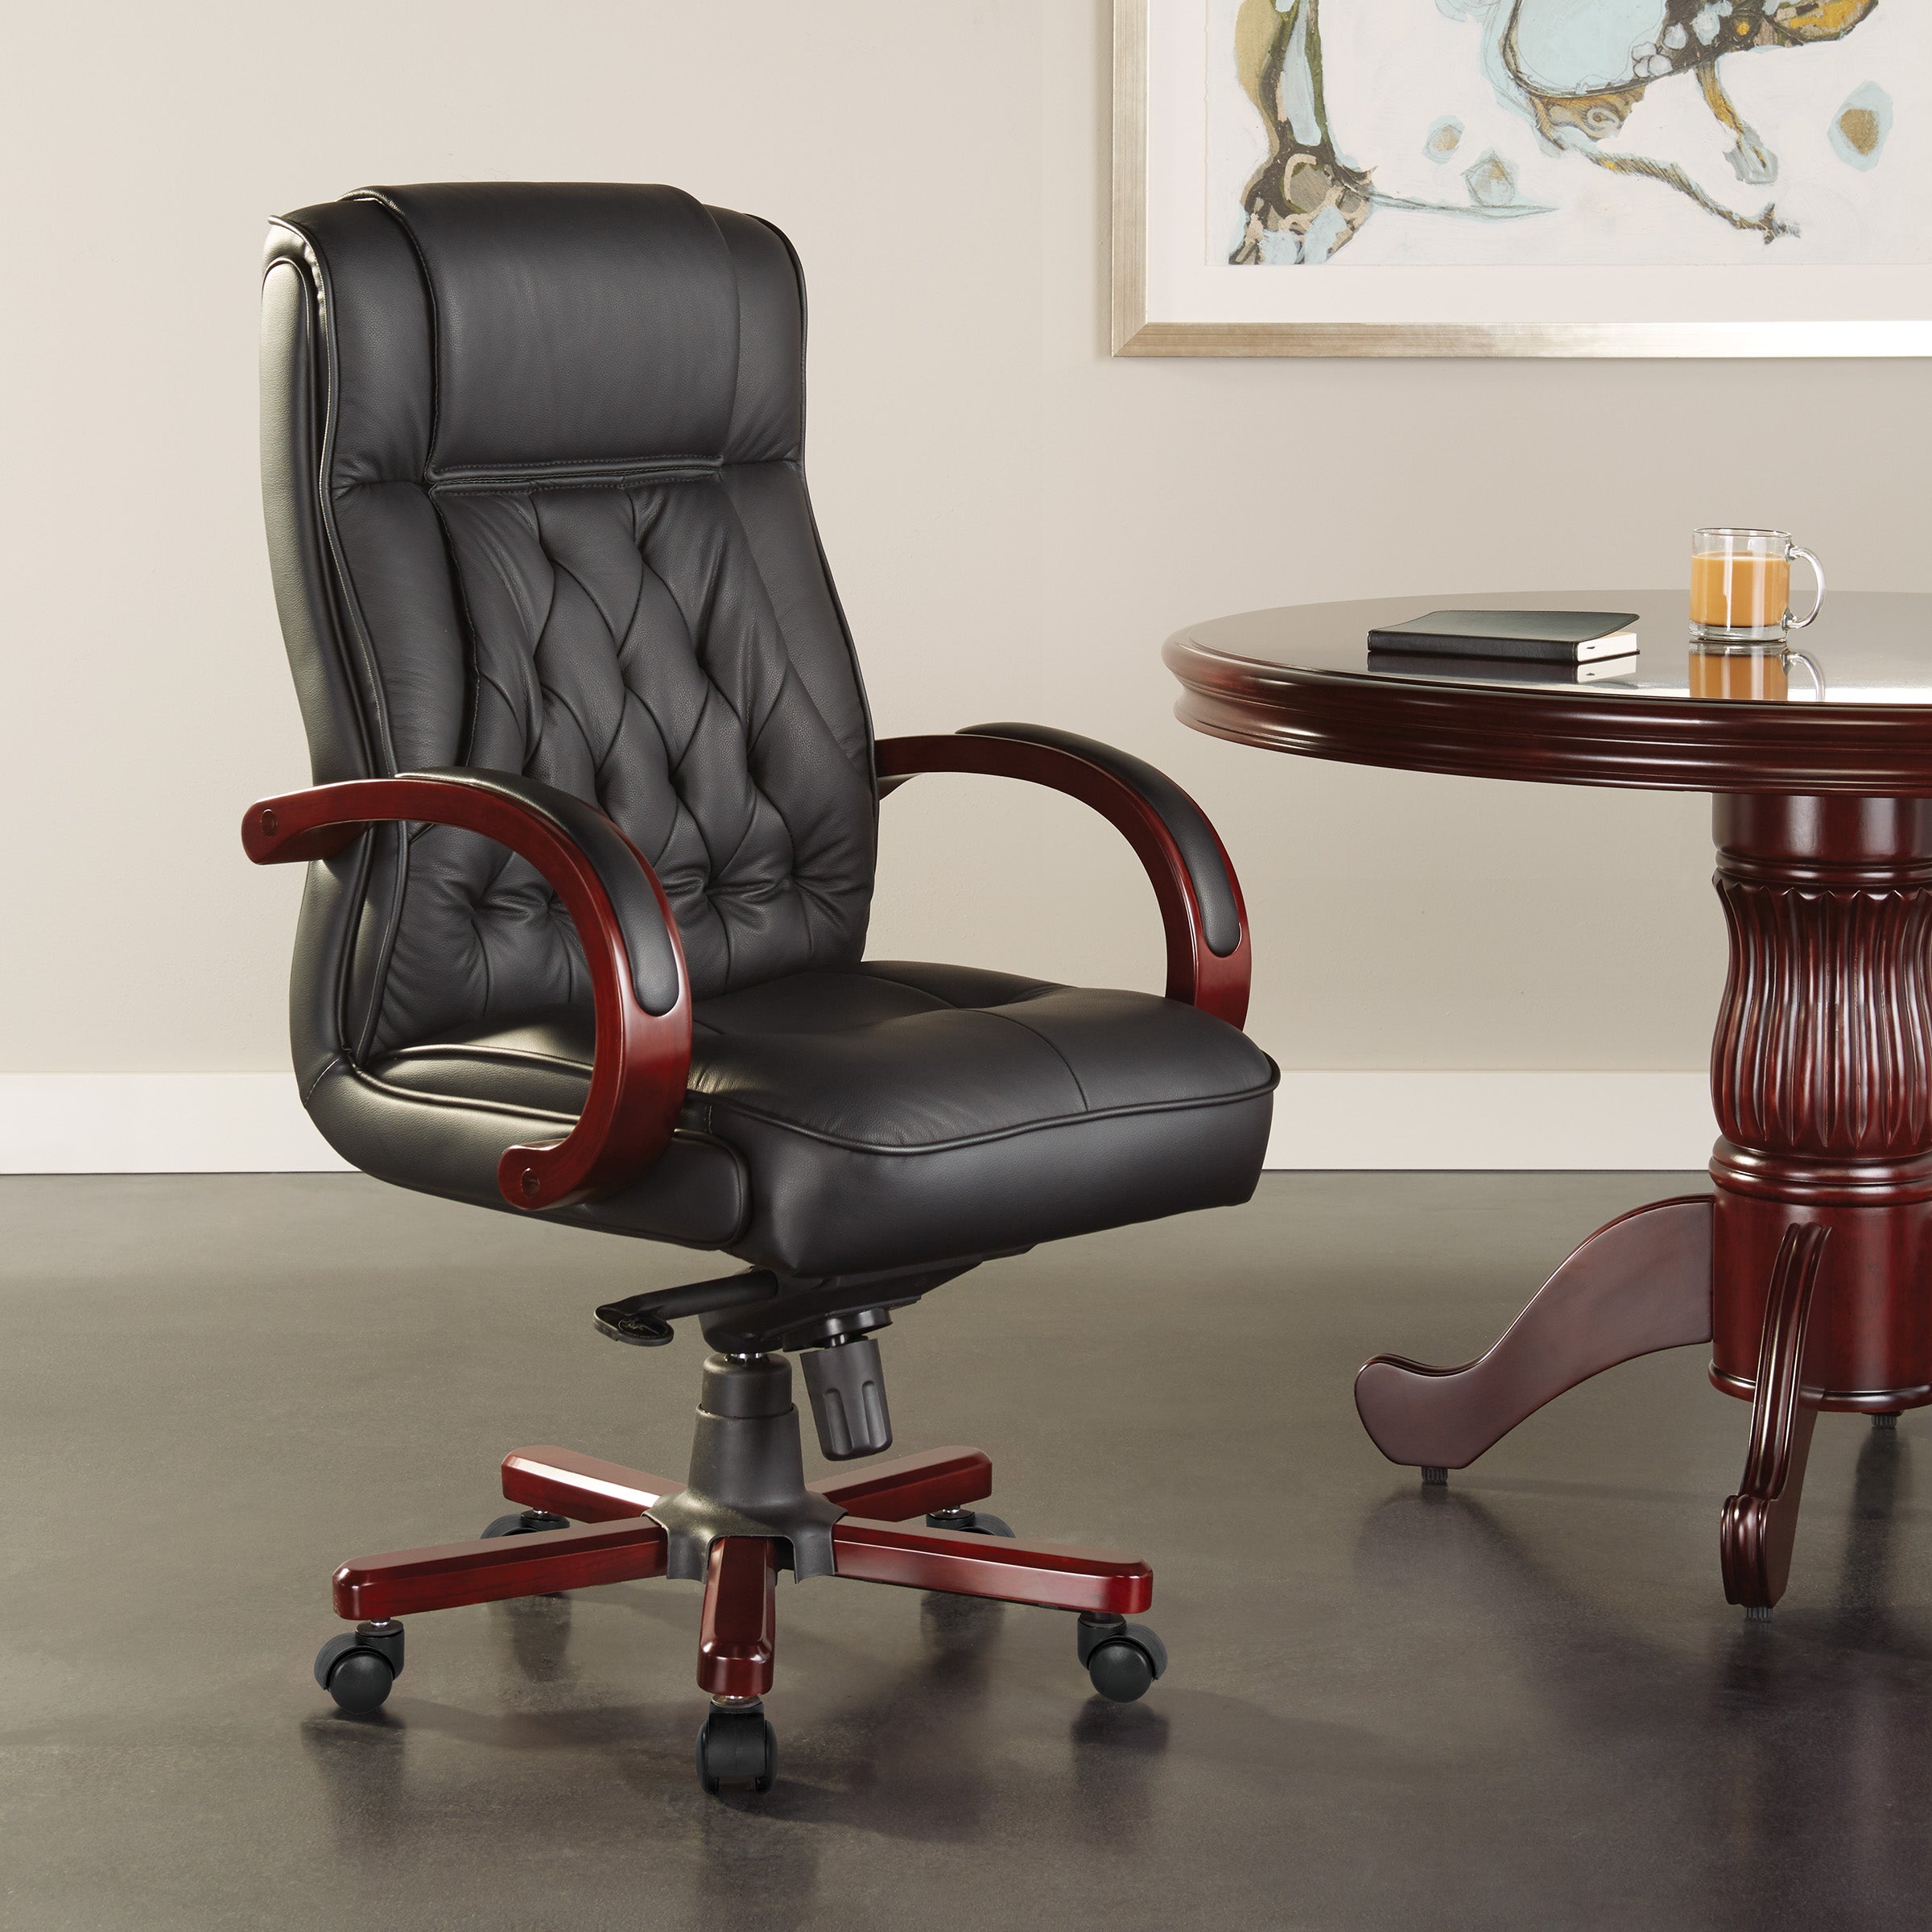 TWN300L - Traditional High Back Executive Leather Office Chair by Office Star